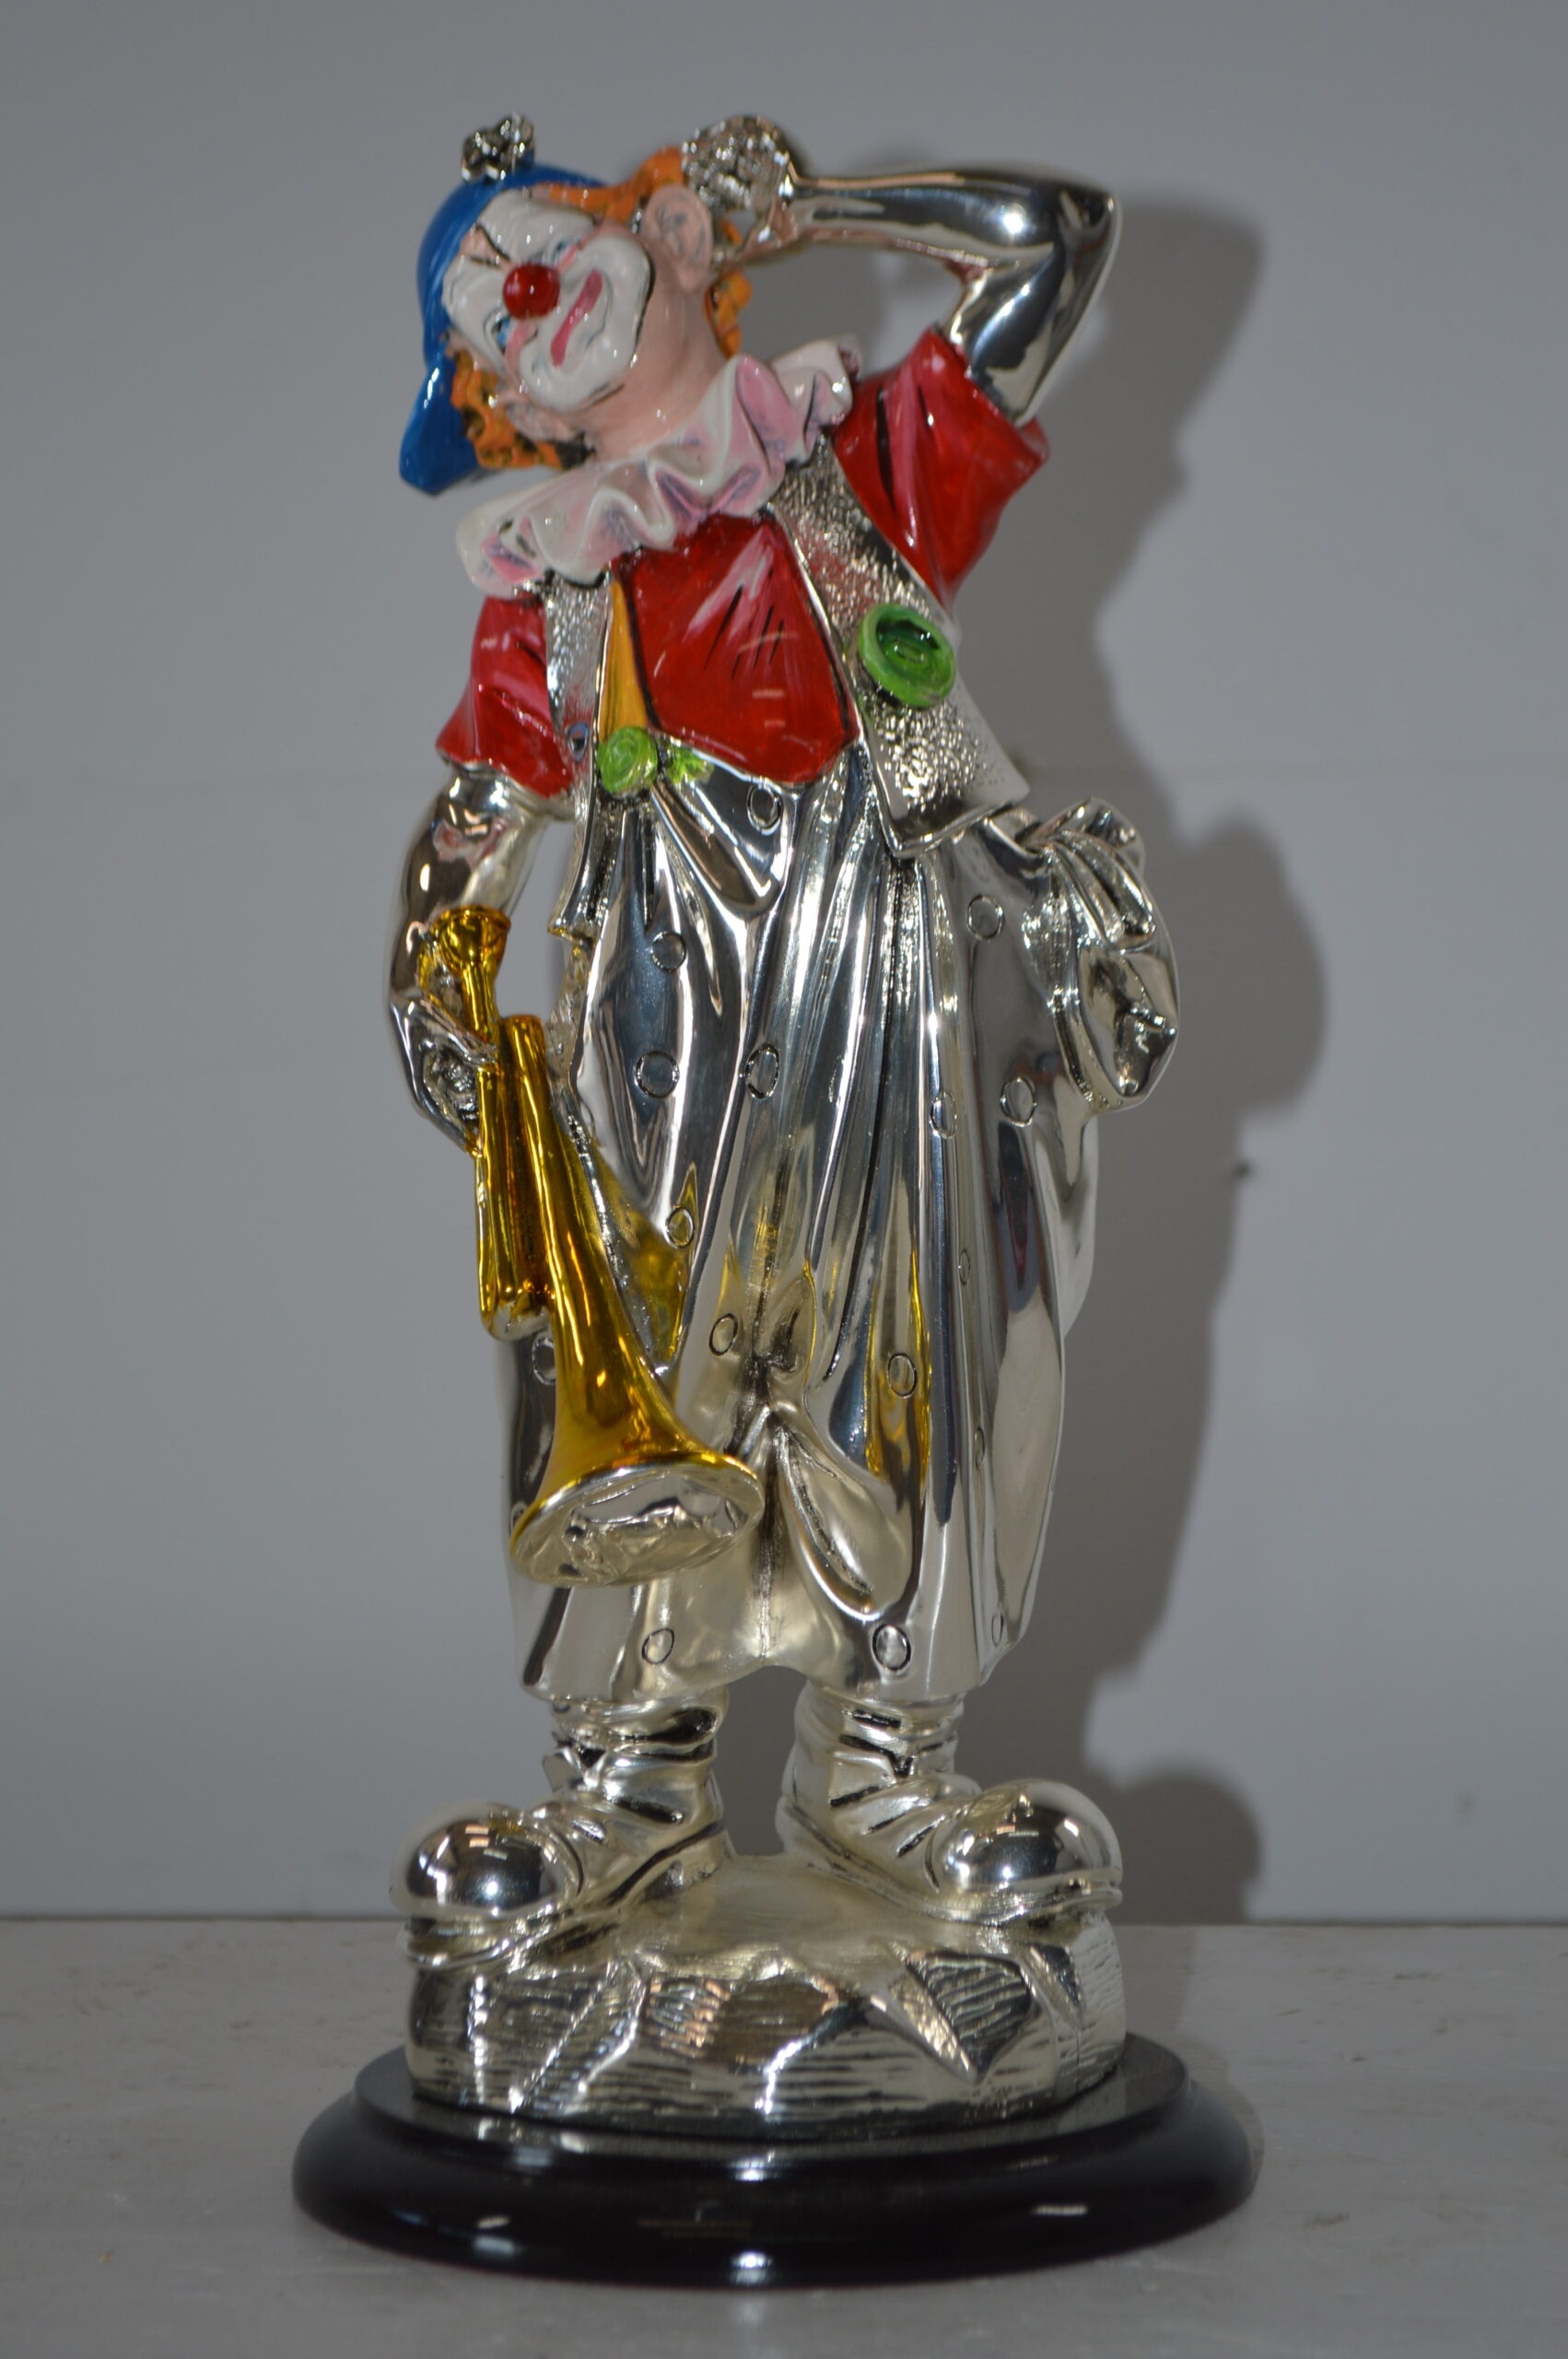 Clown plays Trumpet Resin Statue Silver finish - Size: 6